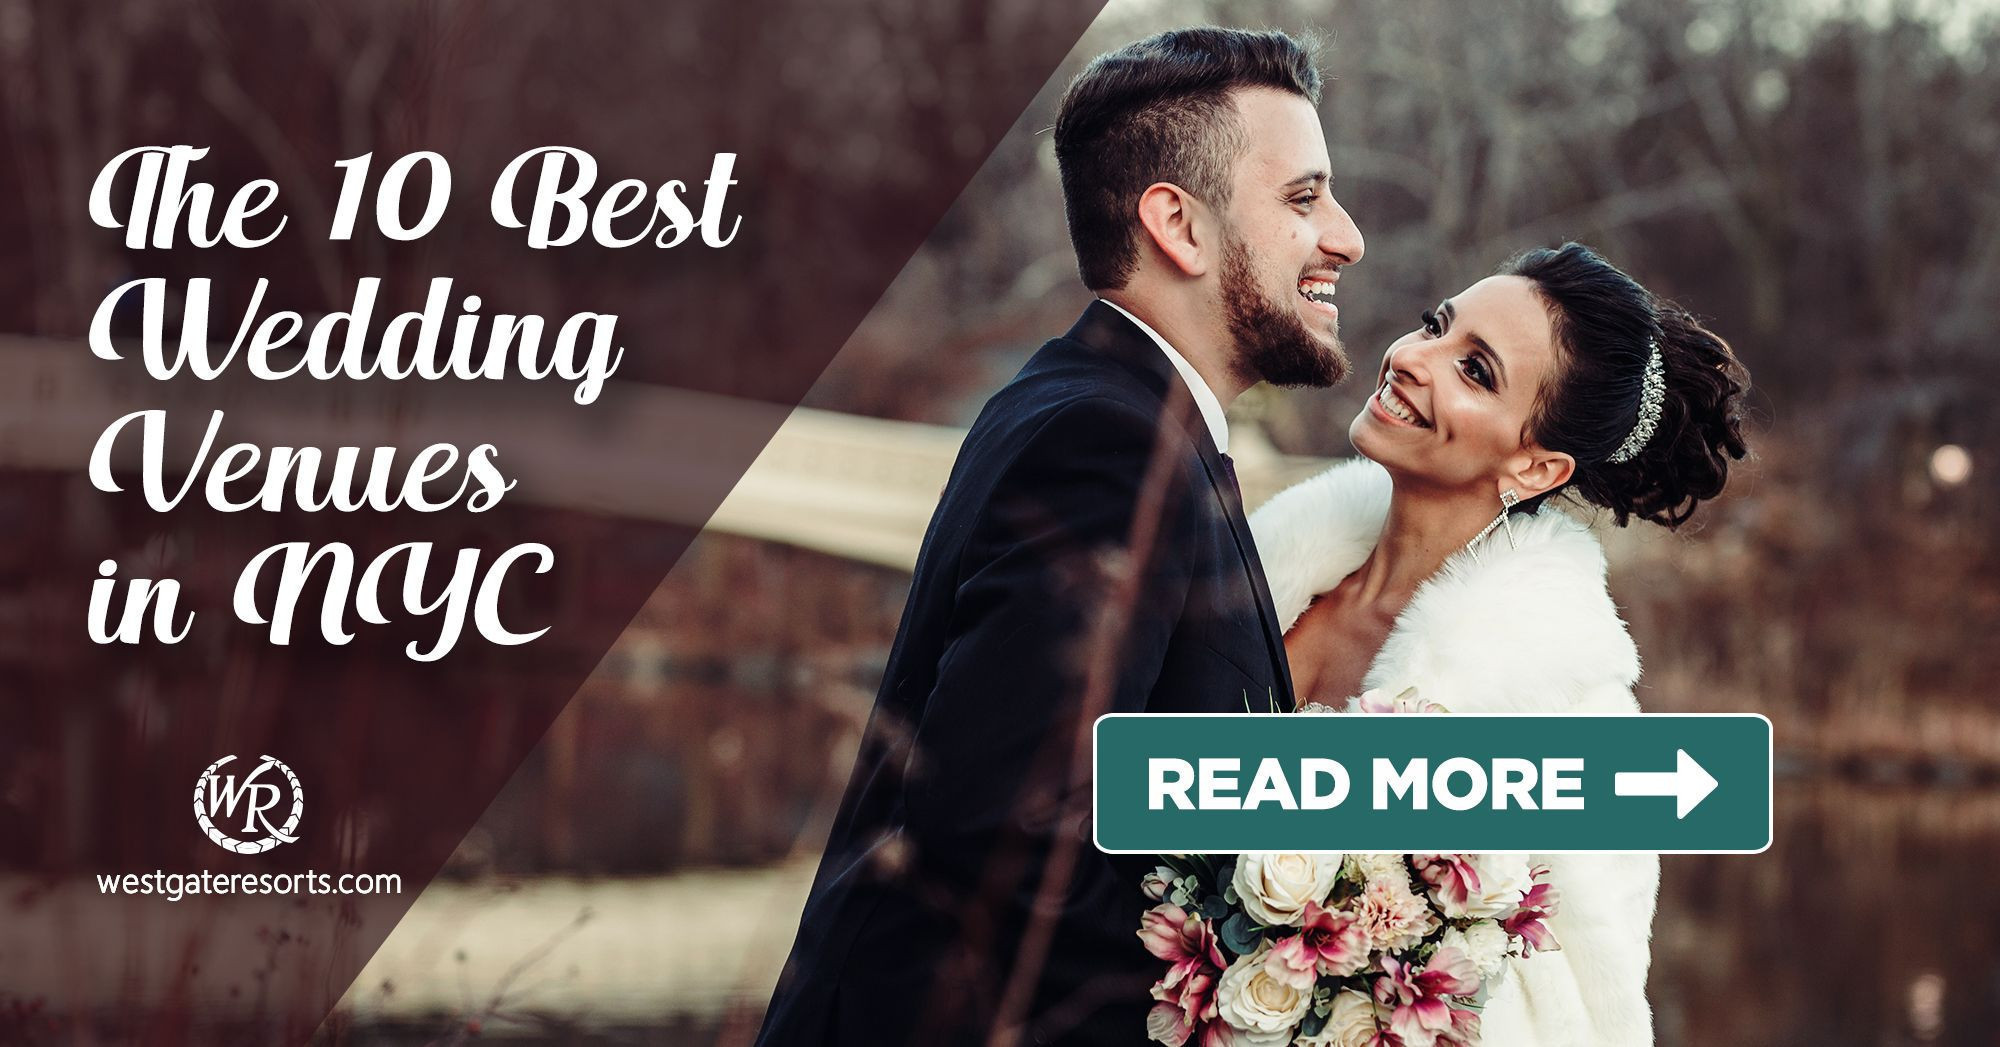 The 10 Best Wedding Venues NYC Locals Boast About